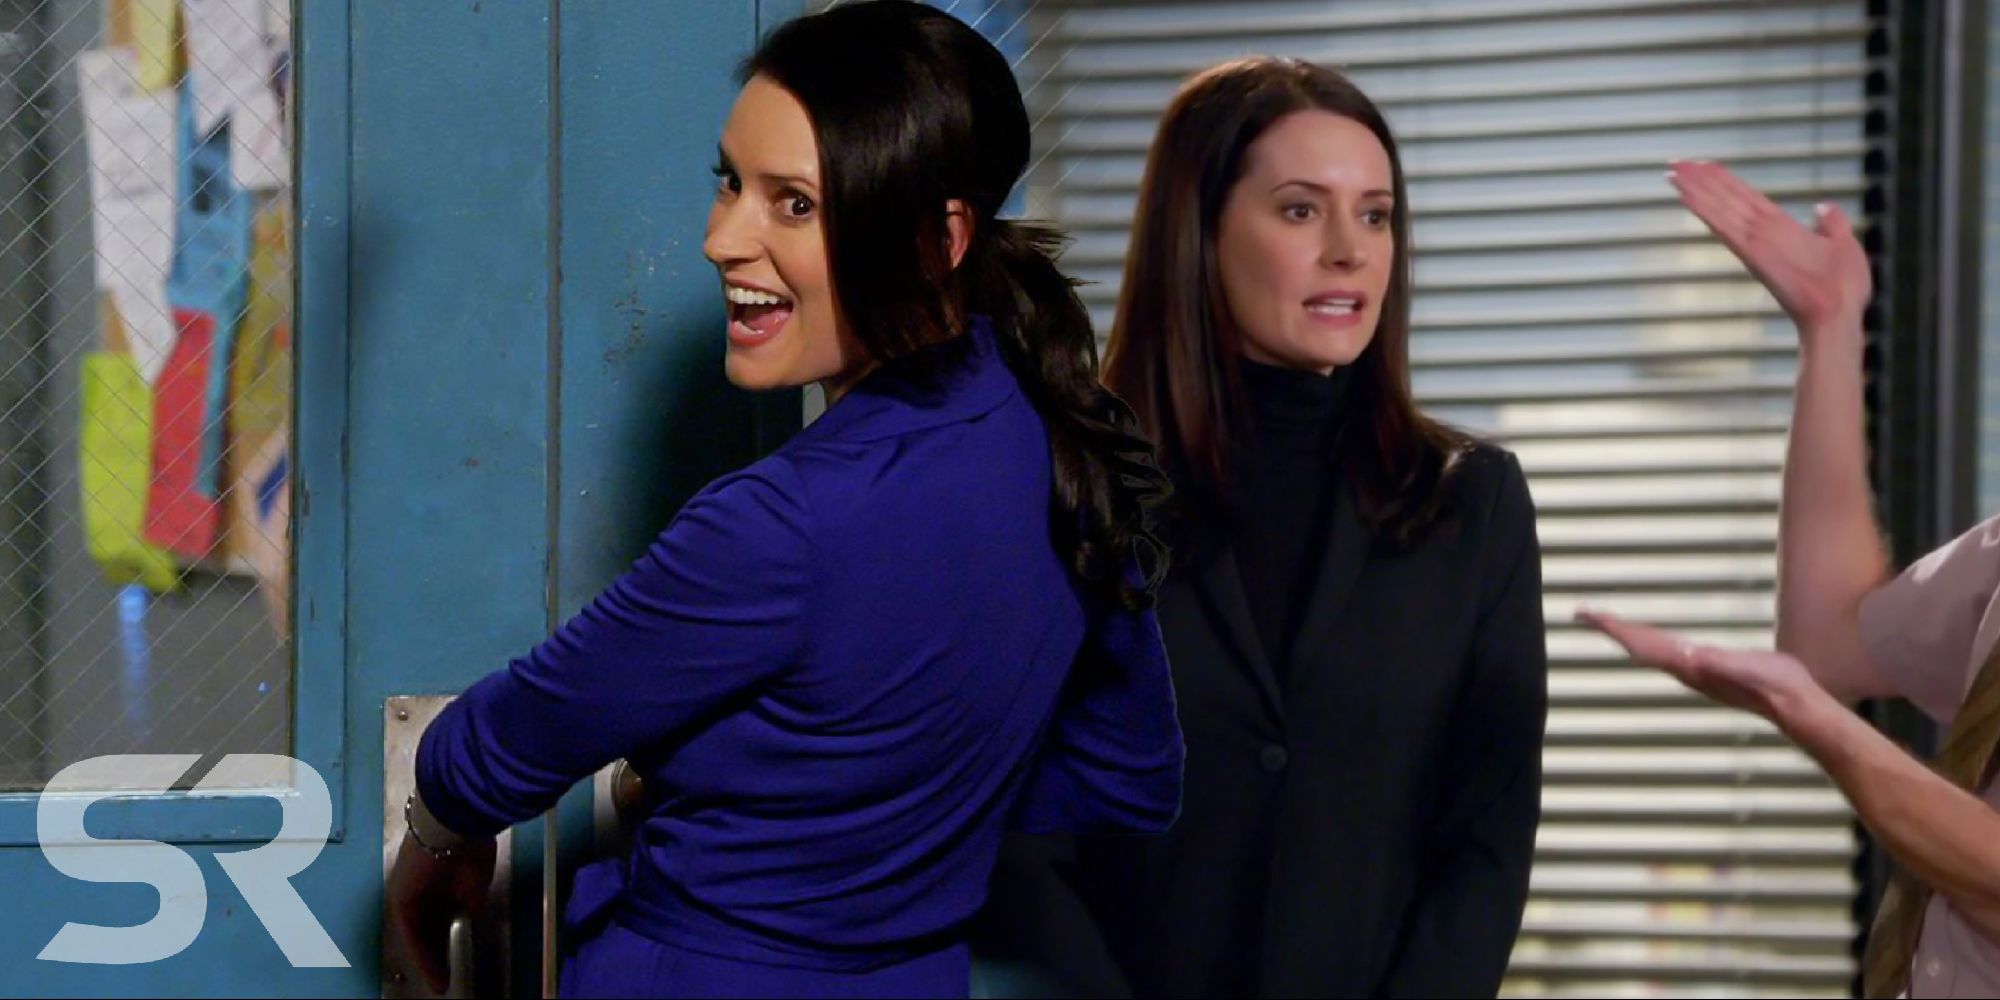 Paget Brewster in Community as Debra Chambers and Frankie Dart